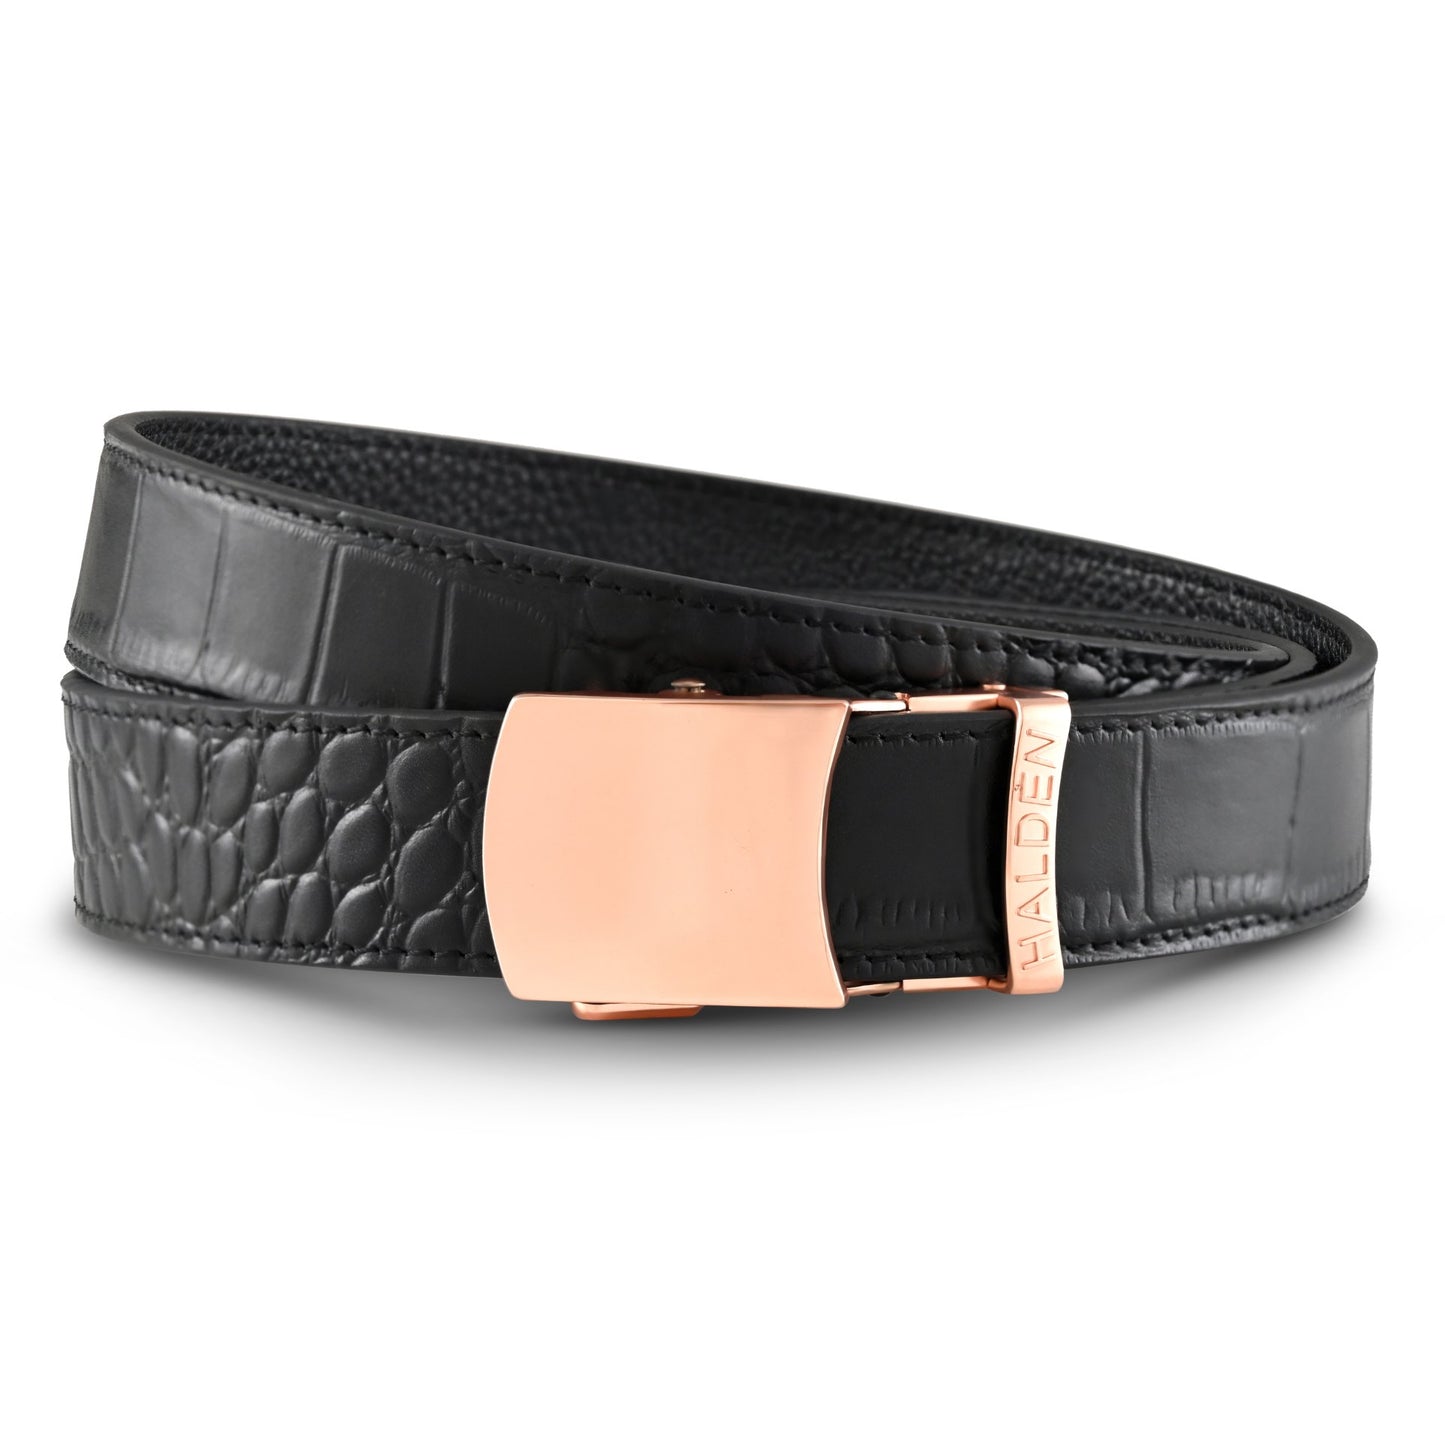 Daven Black with classic buckle